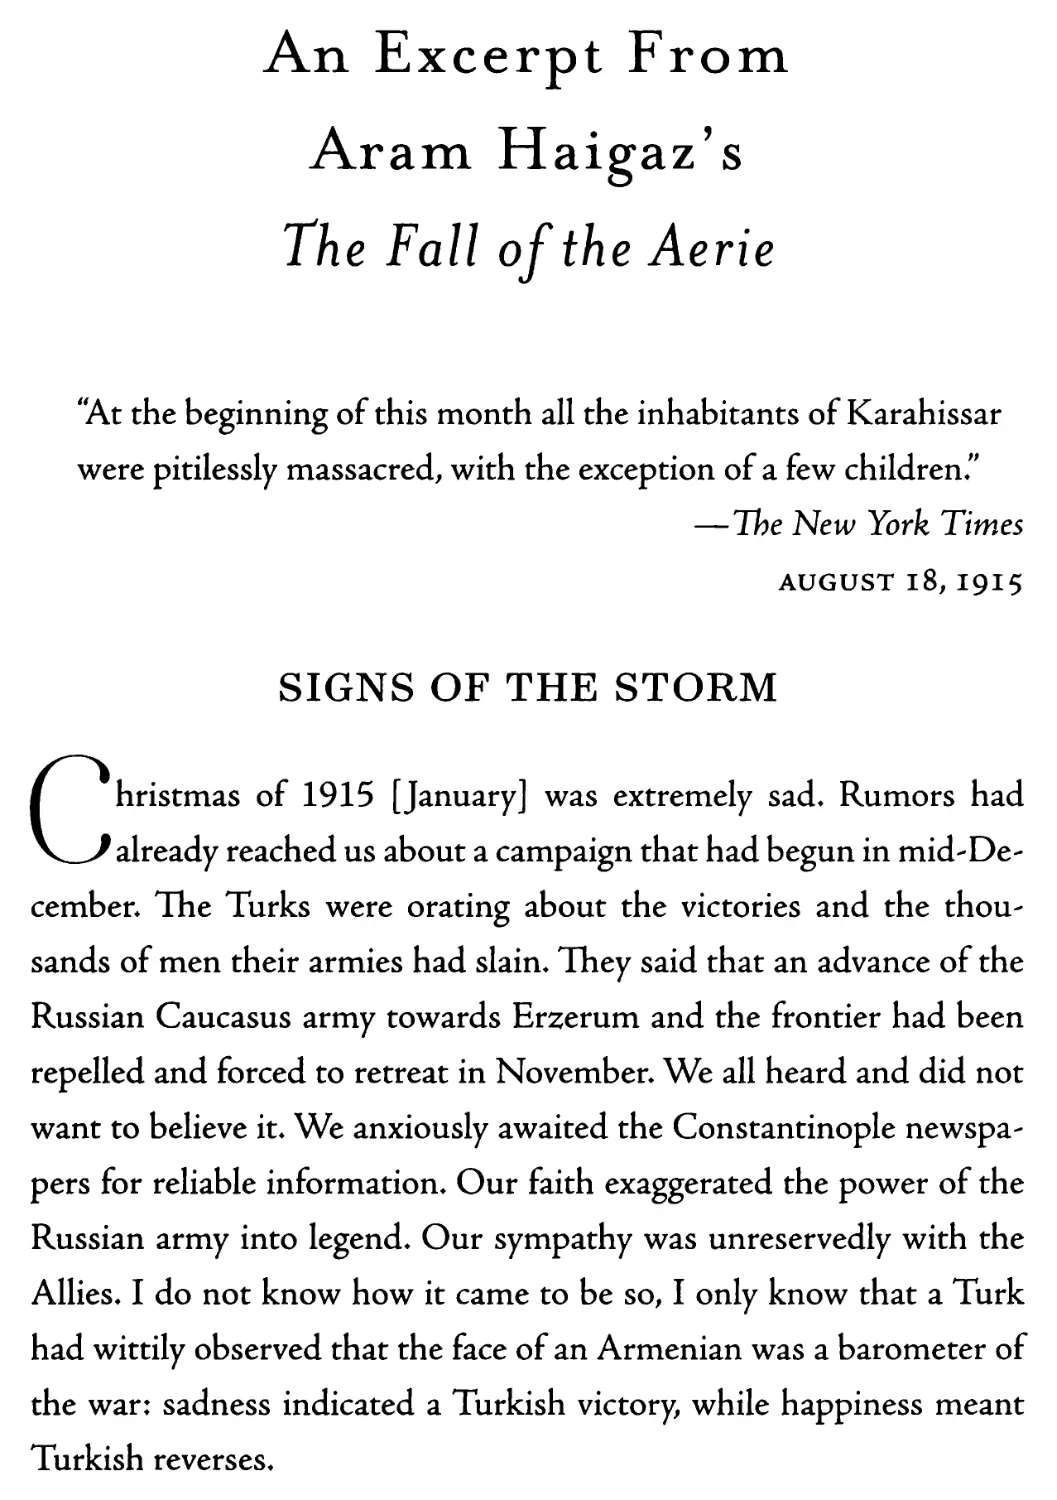 An Excerpt From Aram Haigaz's The Fall of the Aerie